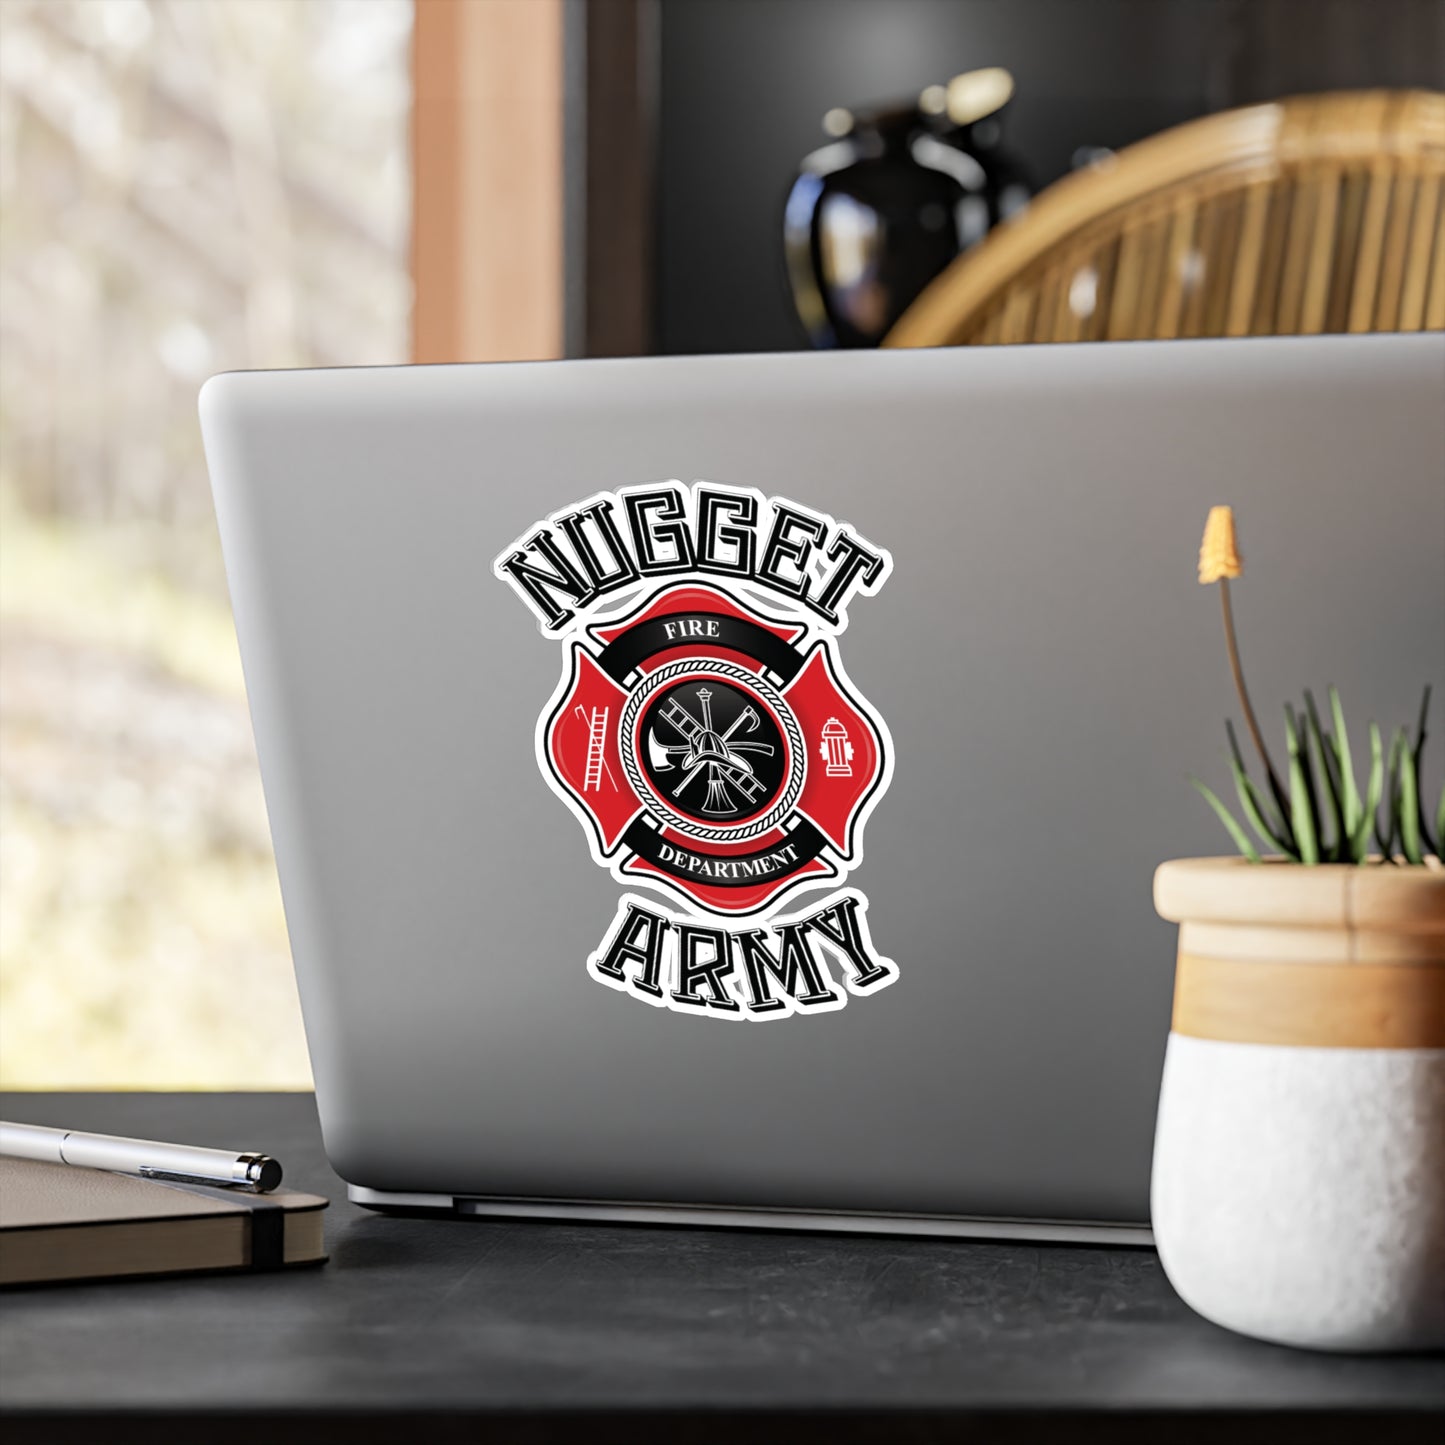 Stand out  with the  Nugget Army Fire  available at Hey Nugget. Grab yours today!